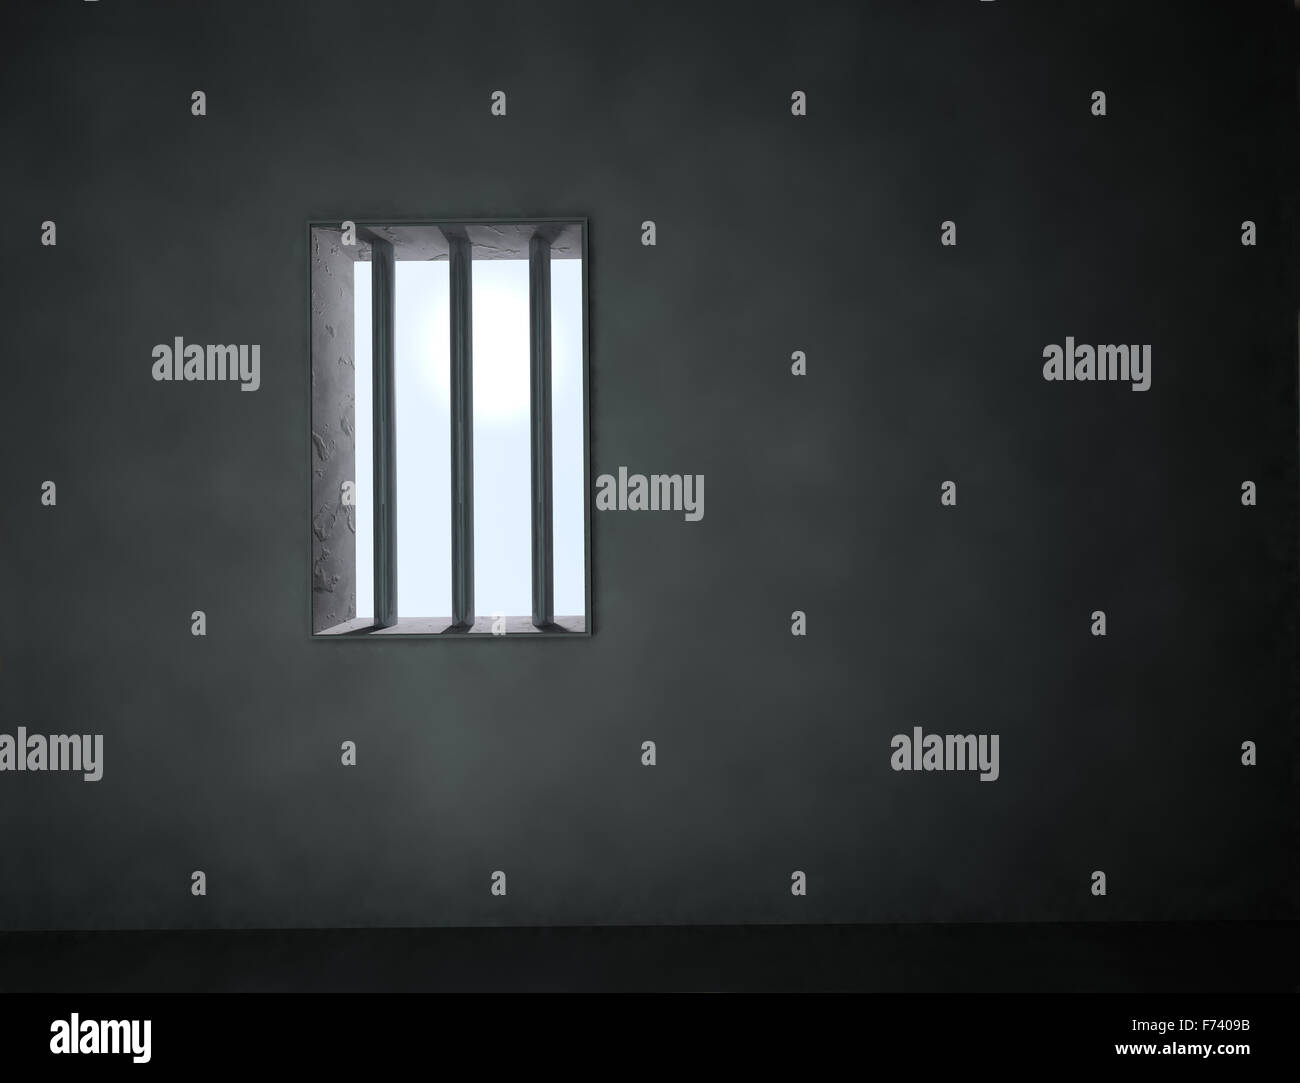 3d architecture background with bars of a jail Stock Photo